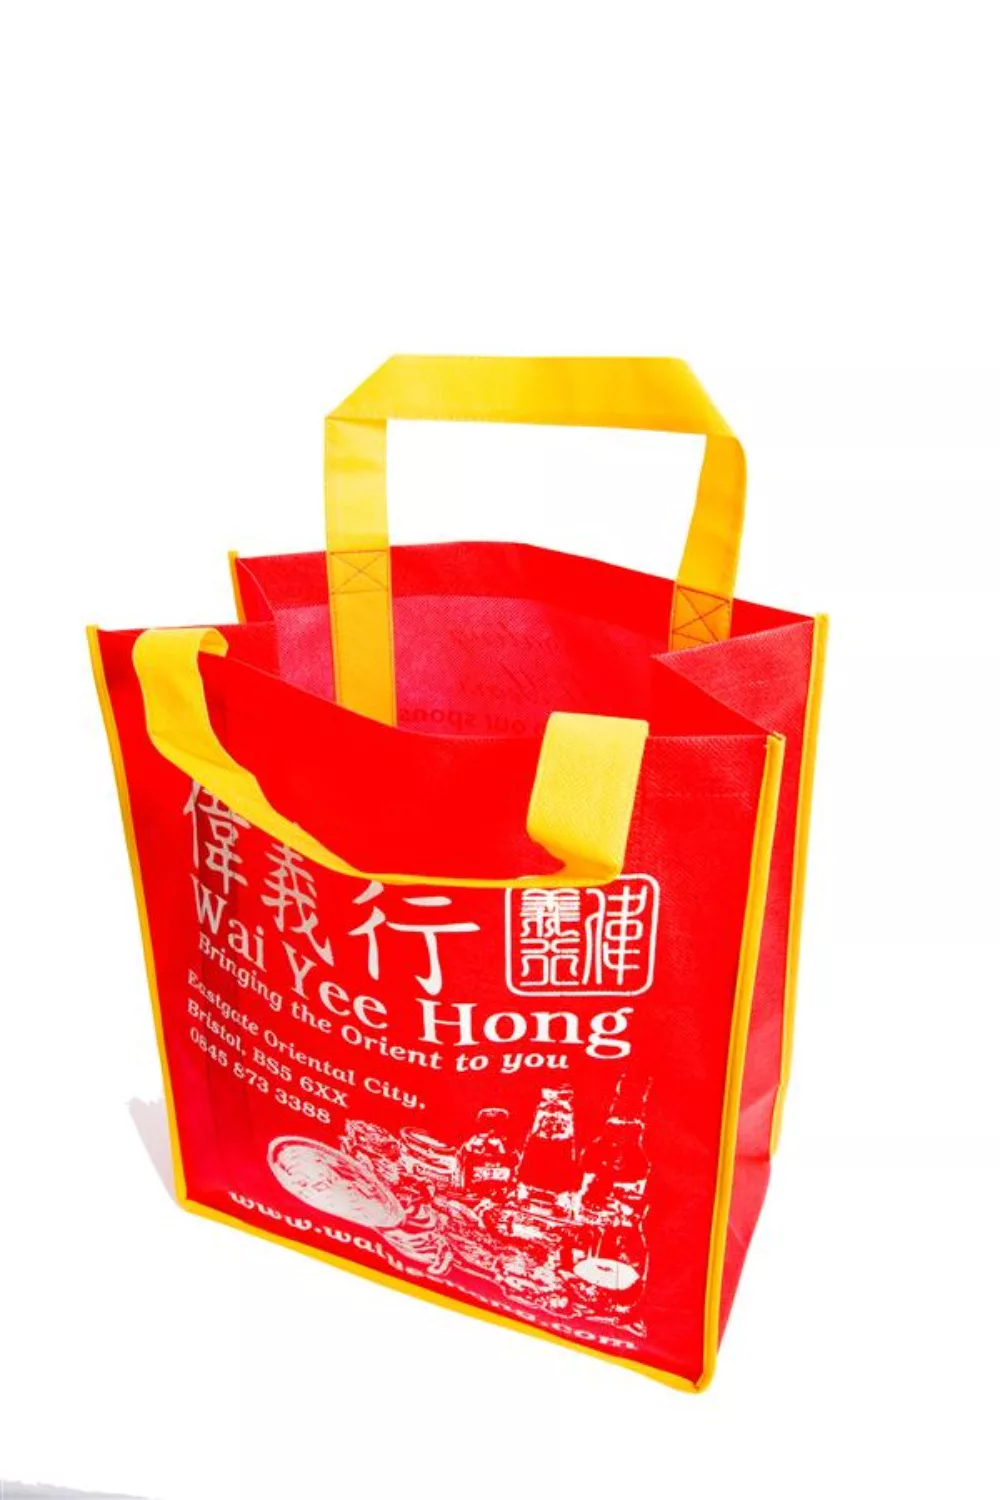 Ditch Single Use Plastic & Bag Your Brand The Indie Supermarket's Guide to Printed Shopping Bags